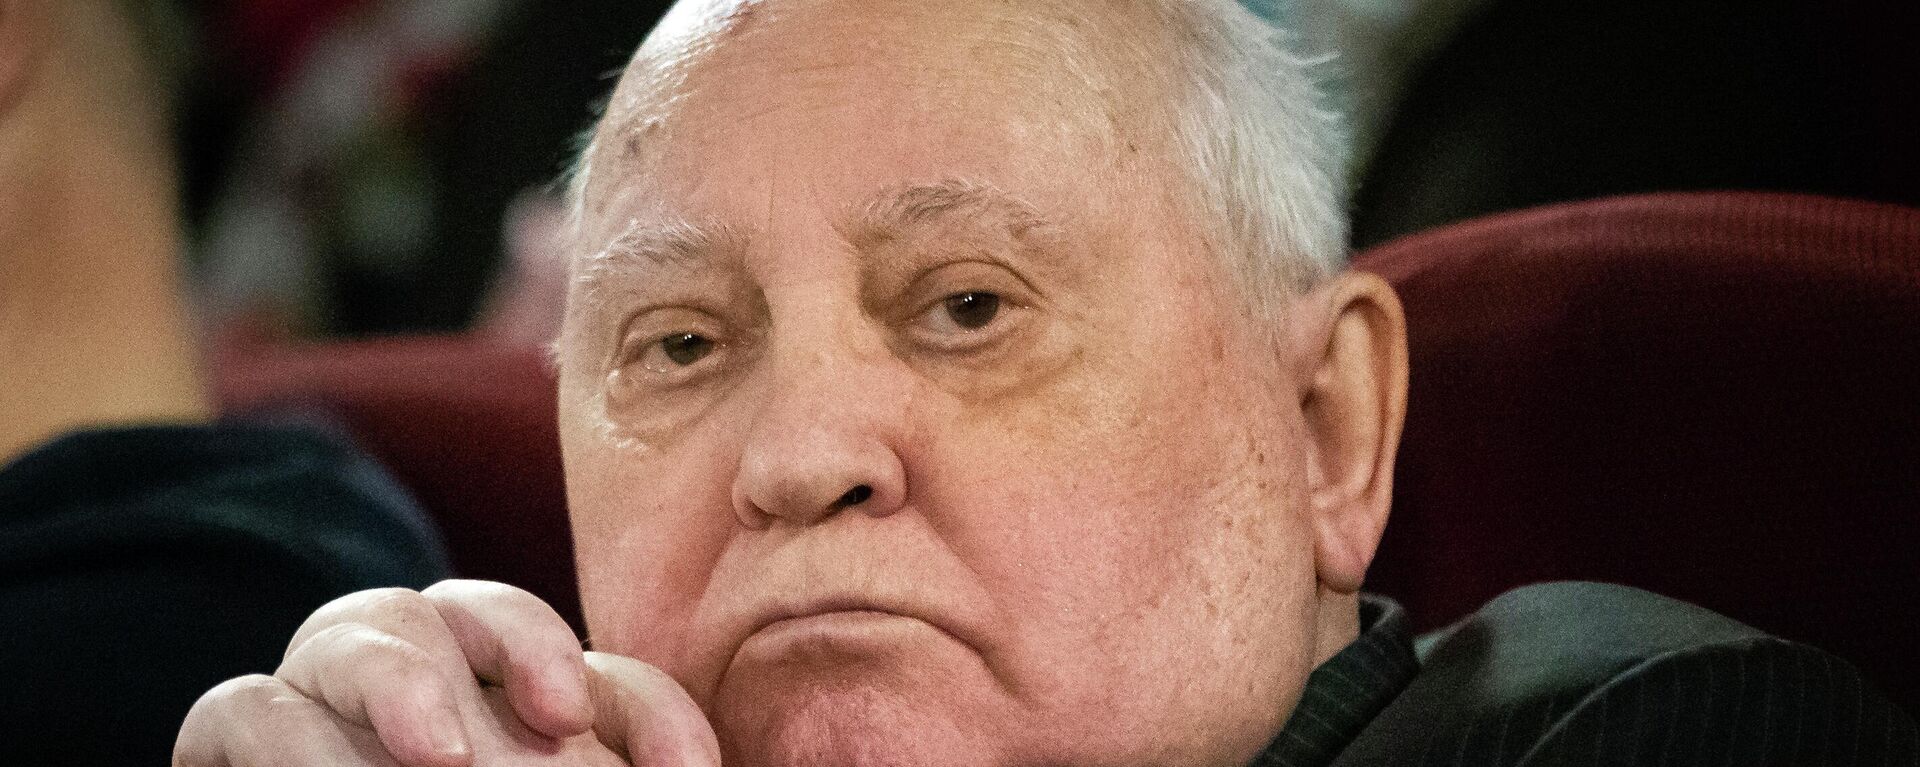 In this Thursday, Nov. 8, 2018 file photo, former Soviet leader Mikhail Gorbachev attends the Moscow premier of a film made by Werner Herzog and British filmmaker Andre Singer based on their conversations, in Moscow, Russia. - Sputnik International, 1920, 30.08.2022